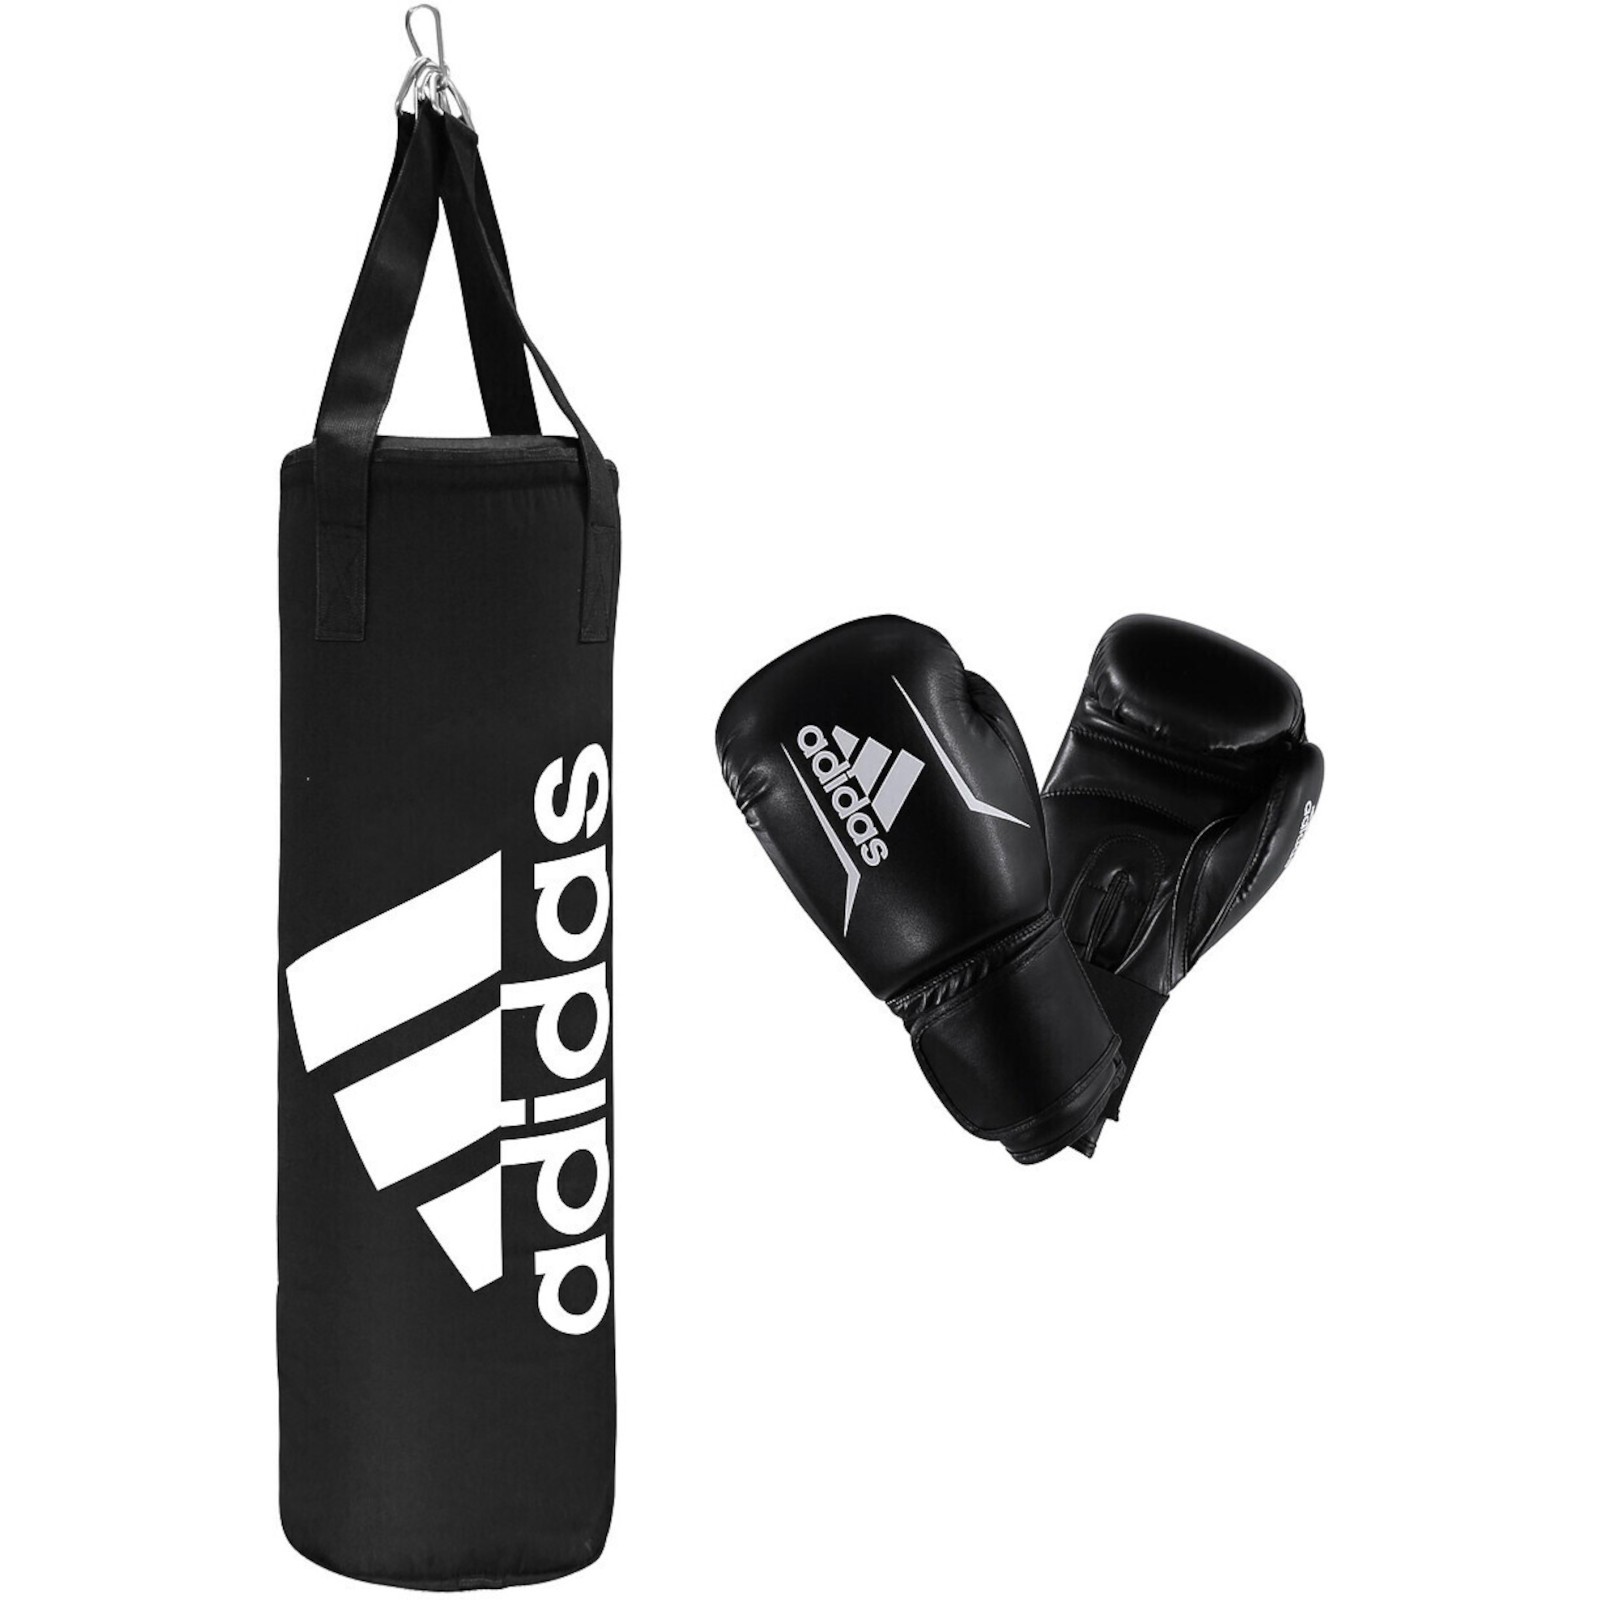 Amazon.com : adidas Speed Home Gym Heavy Bag - for Boxing, MMA, Kick Boxing  Training, Fitness and Cardio Workout - Filled - for Men & Women (3ft, 50lb,  Black Red) : Sports & Outdoors